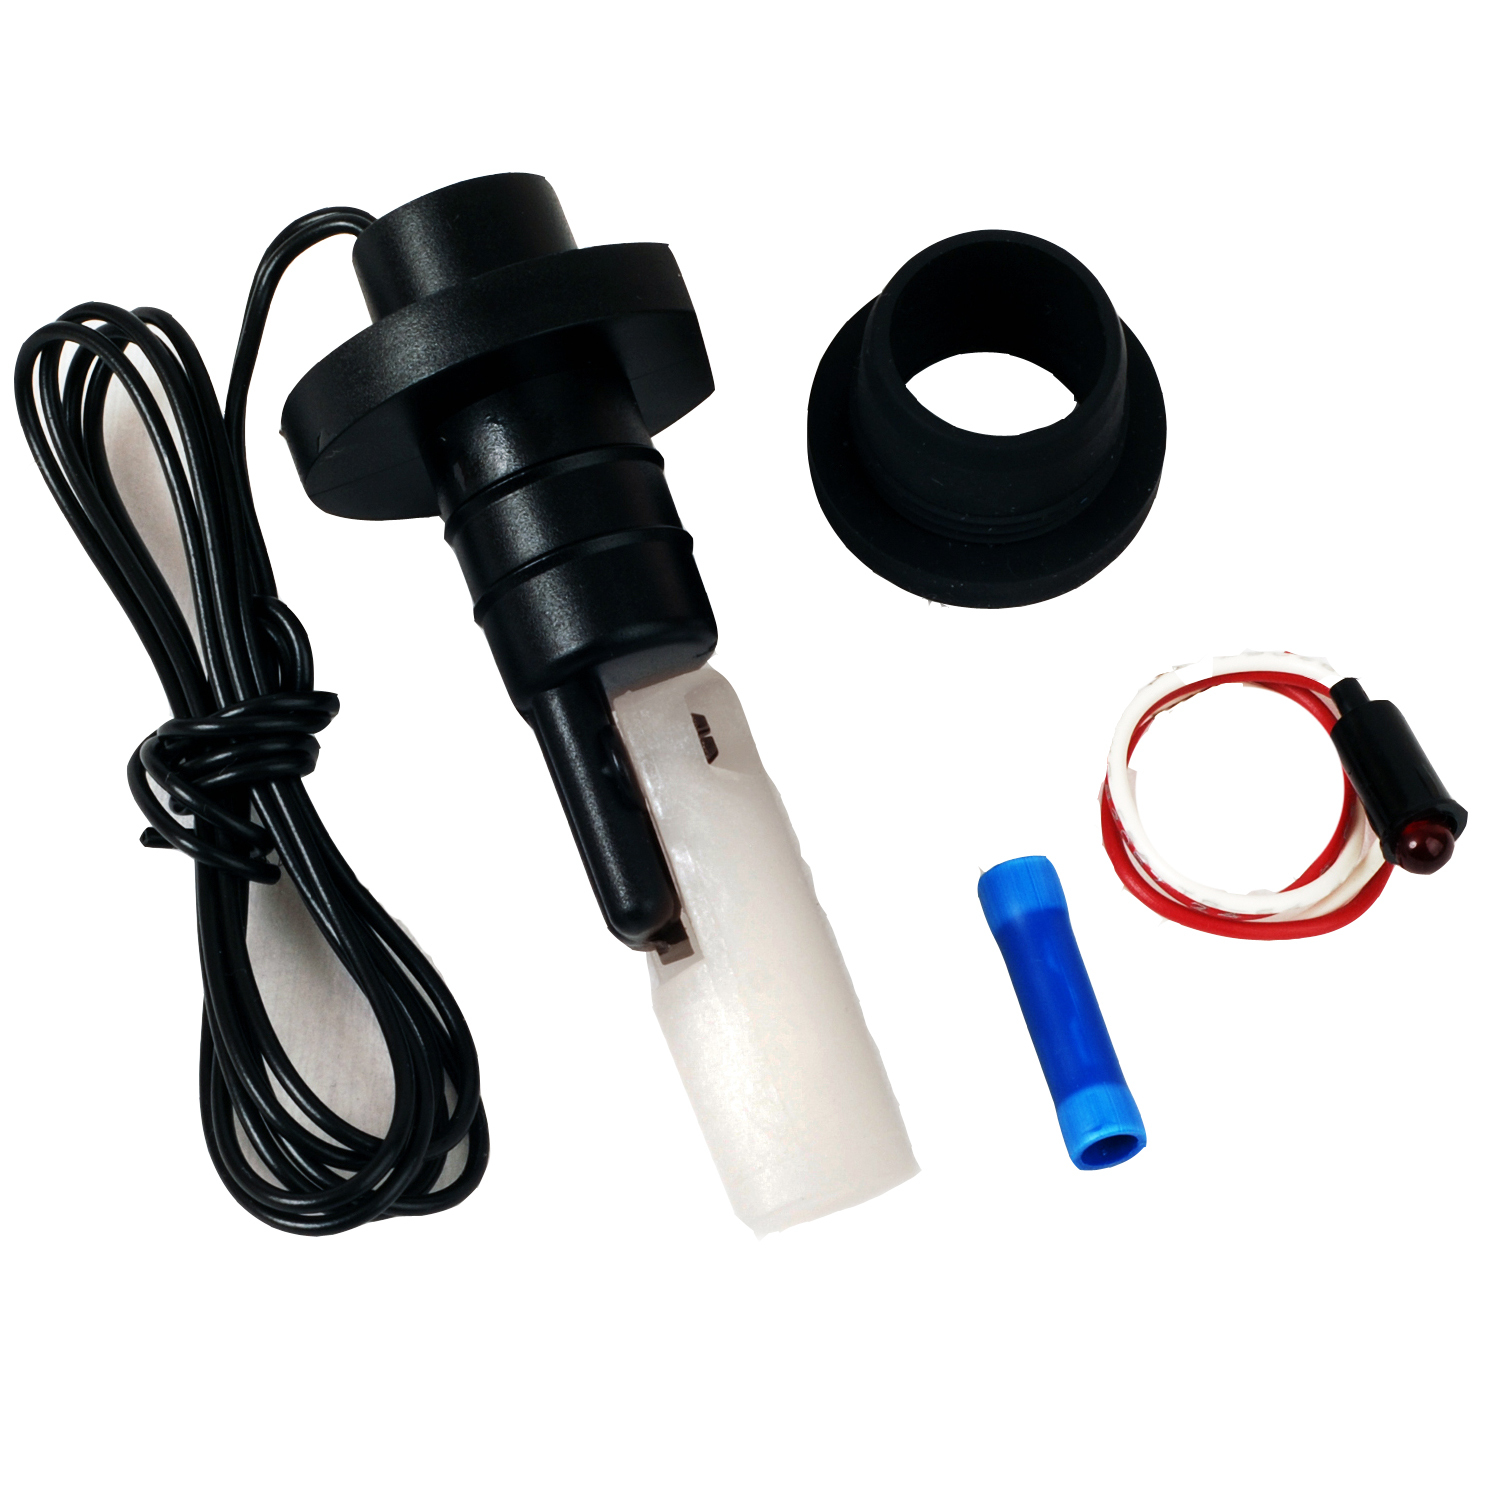 Snow Performance 40035 Low Fluid Level Indicator, LED Indicator Included, Snow Performance Water Injection Systems, Kit